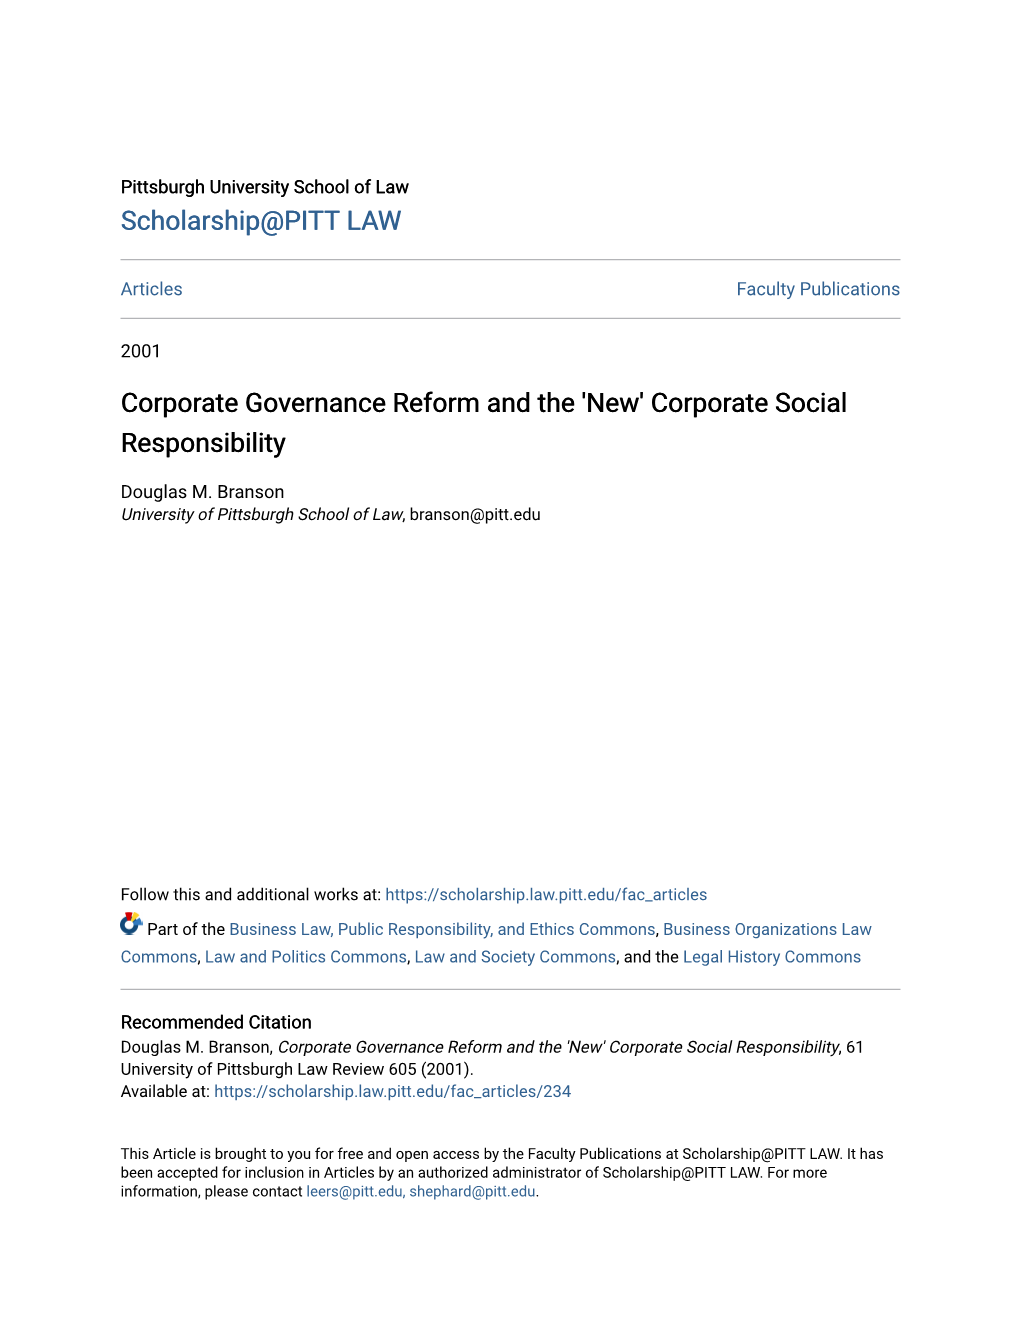 Corporate Governance Reform and the 'New' Corporate Social Responsibility